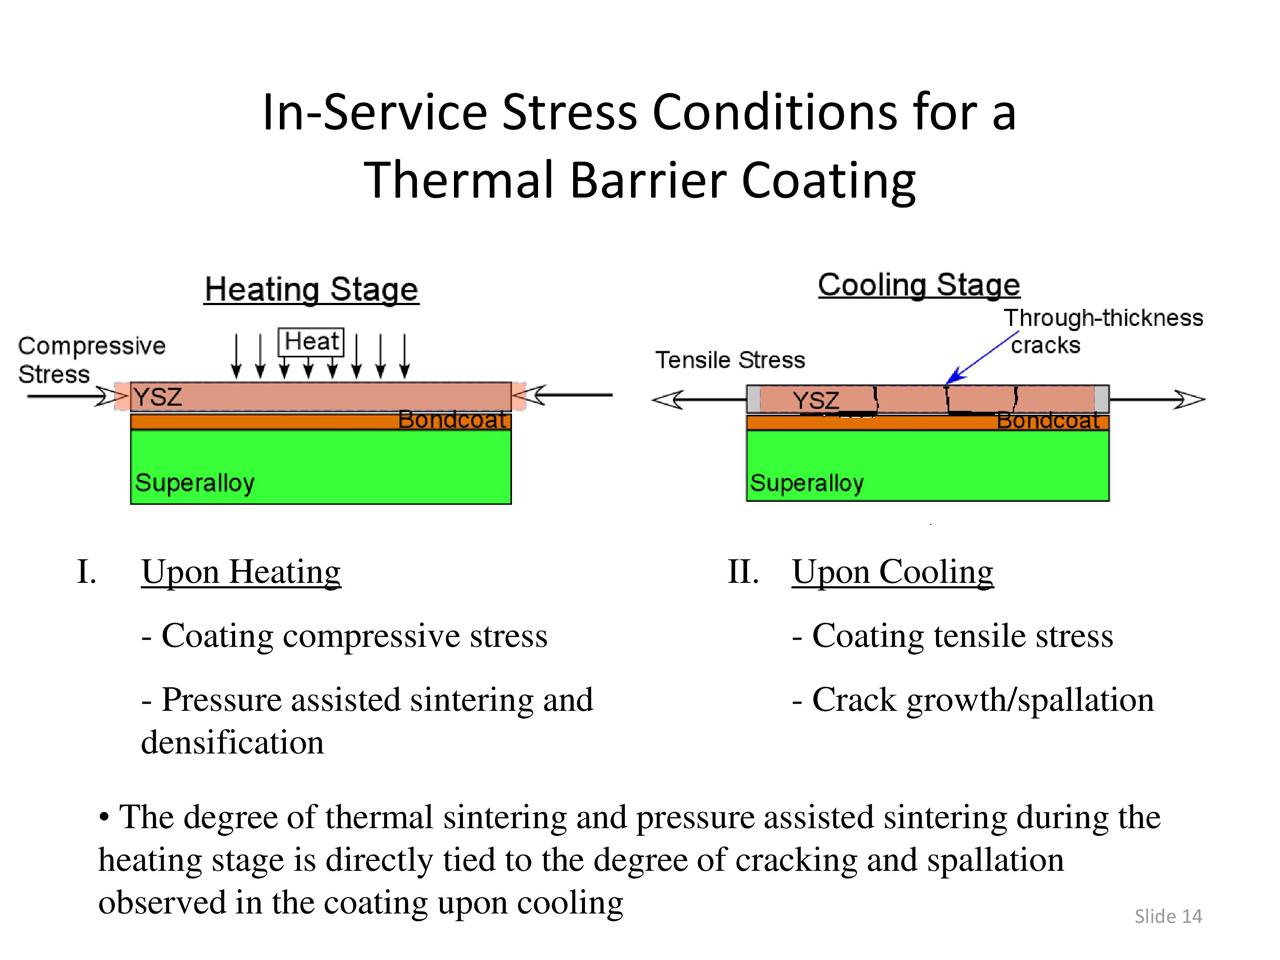 In-Service Stress Conditions for a Thermal Barrier Coating